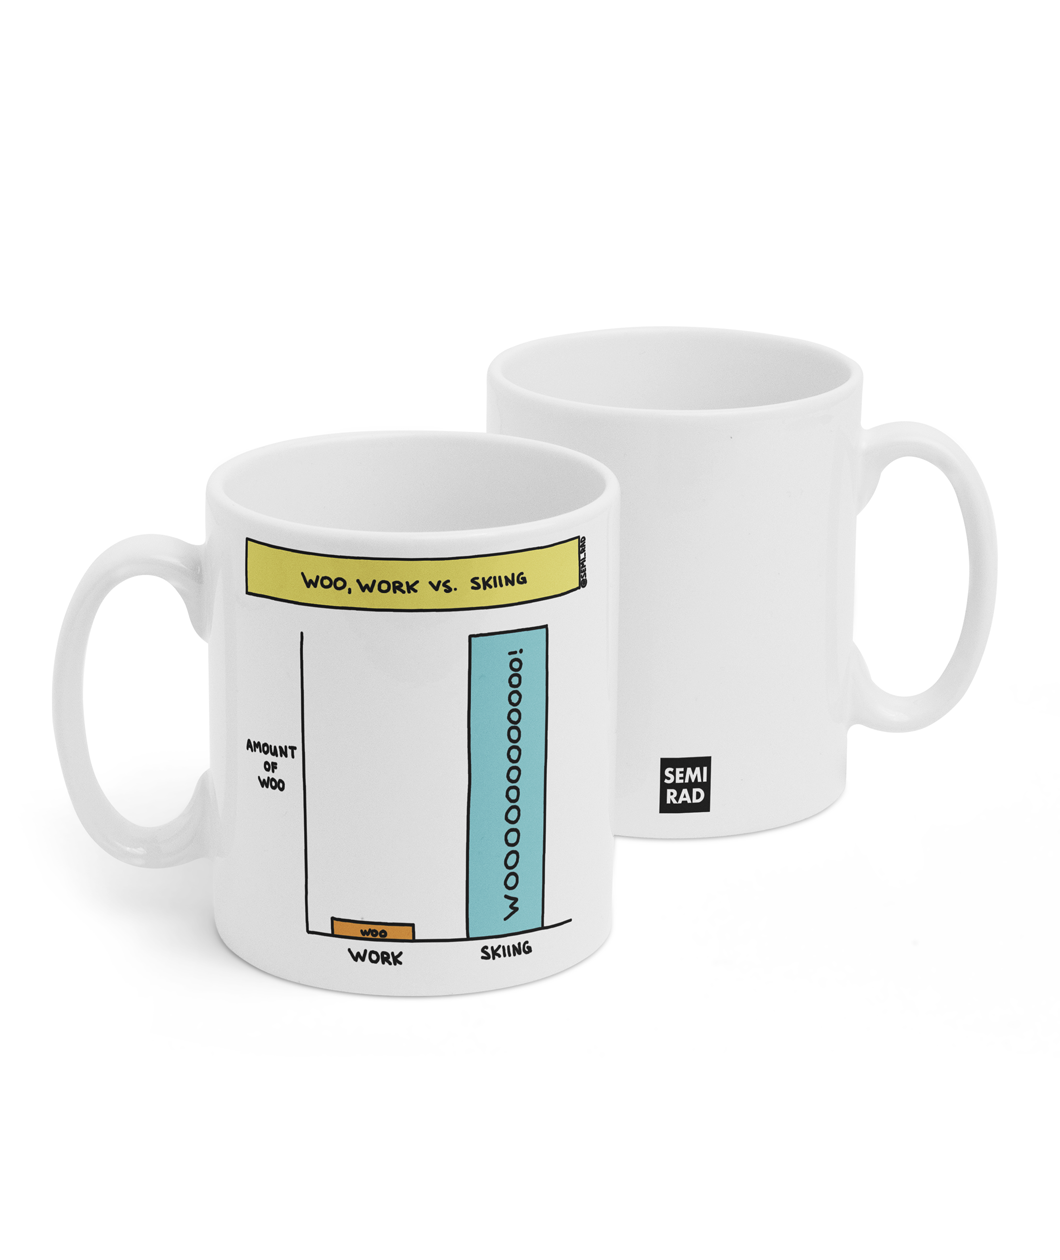 Two white mugs sitting next to each other showing two sides of the same mug. The front side has a graph of 